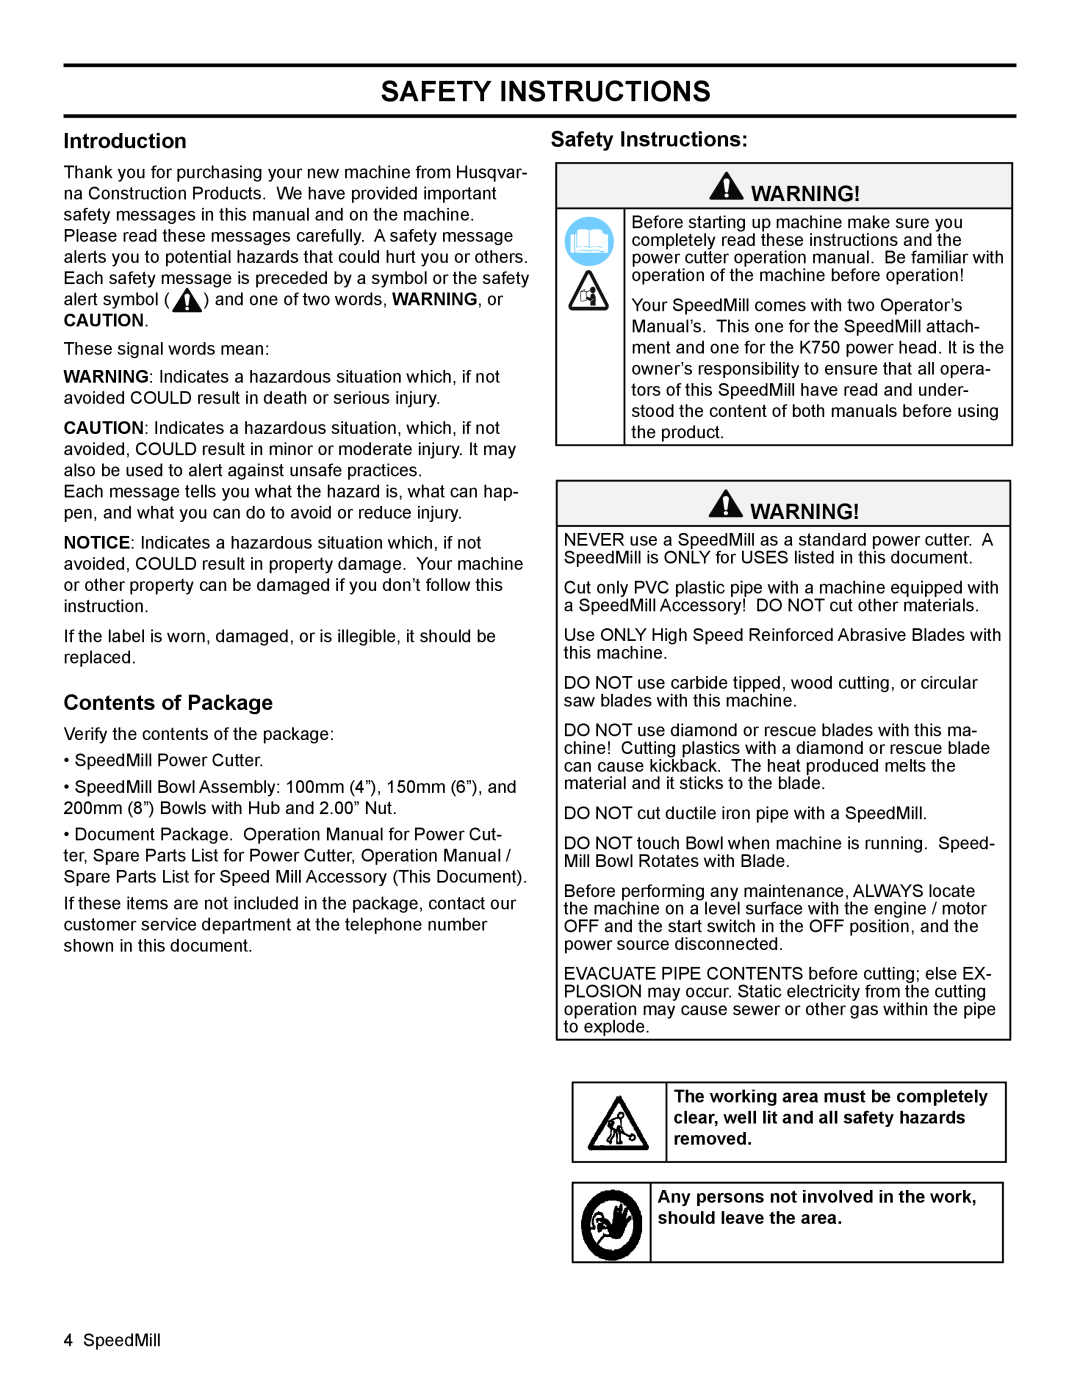 Husqvarna K 750 manual Safety Instructions, Introduction, Contents of Package 